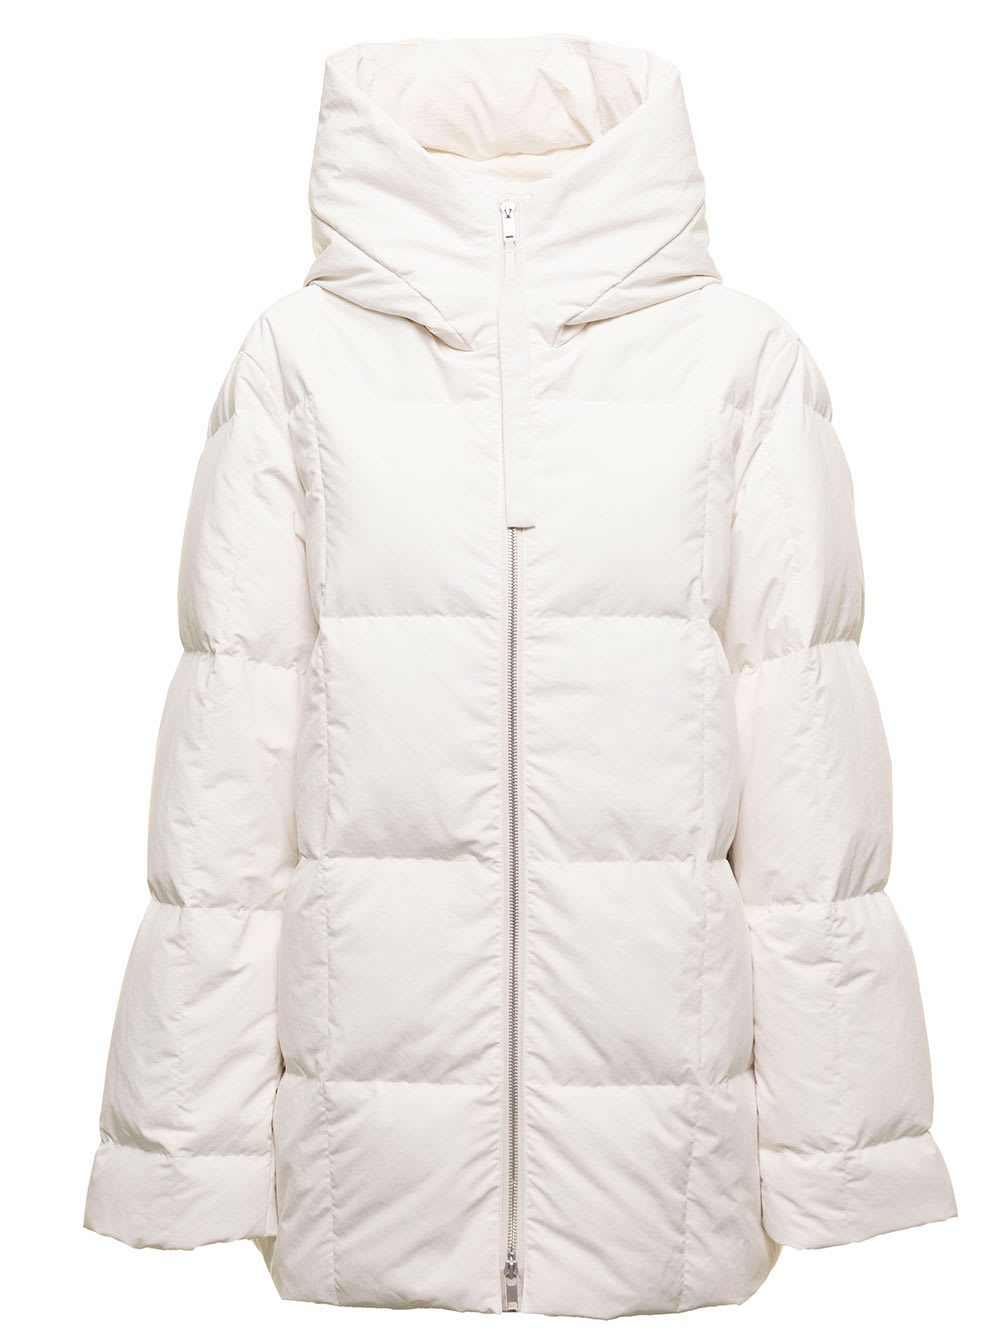 Jil Sander Womans White Quilted Nylon Oversize Down Jacket